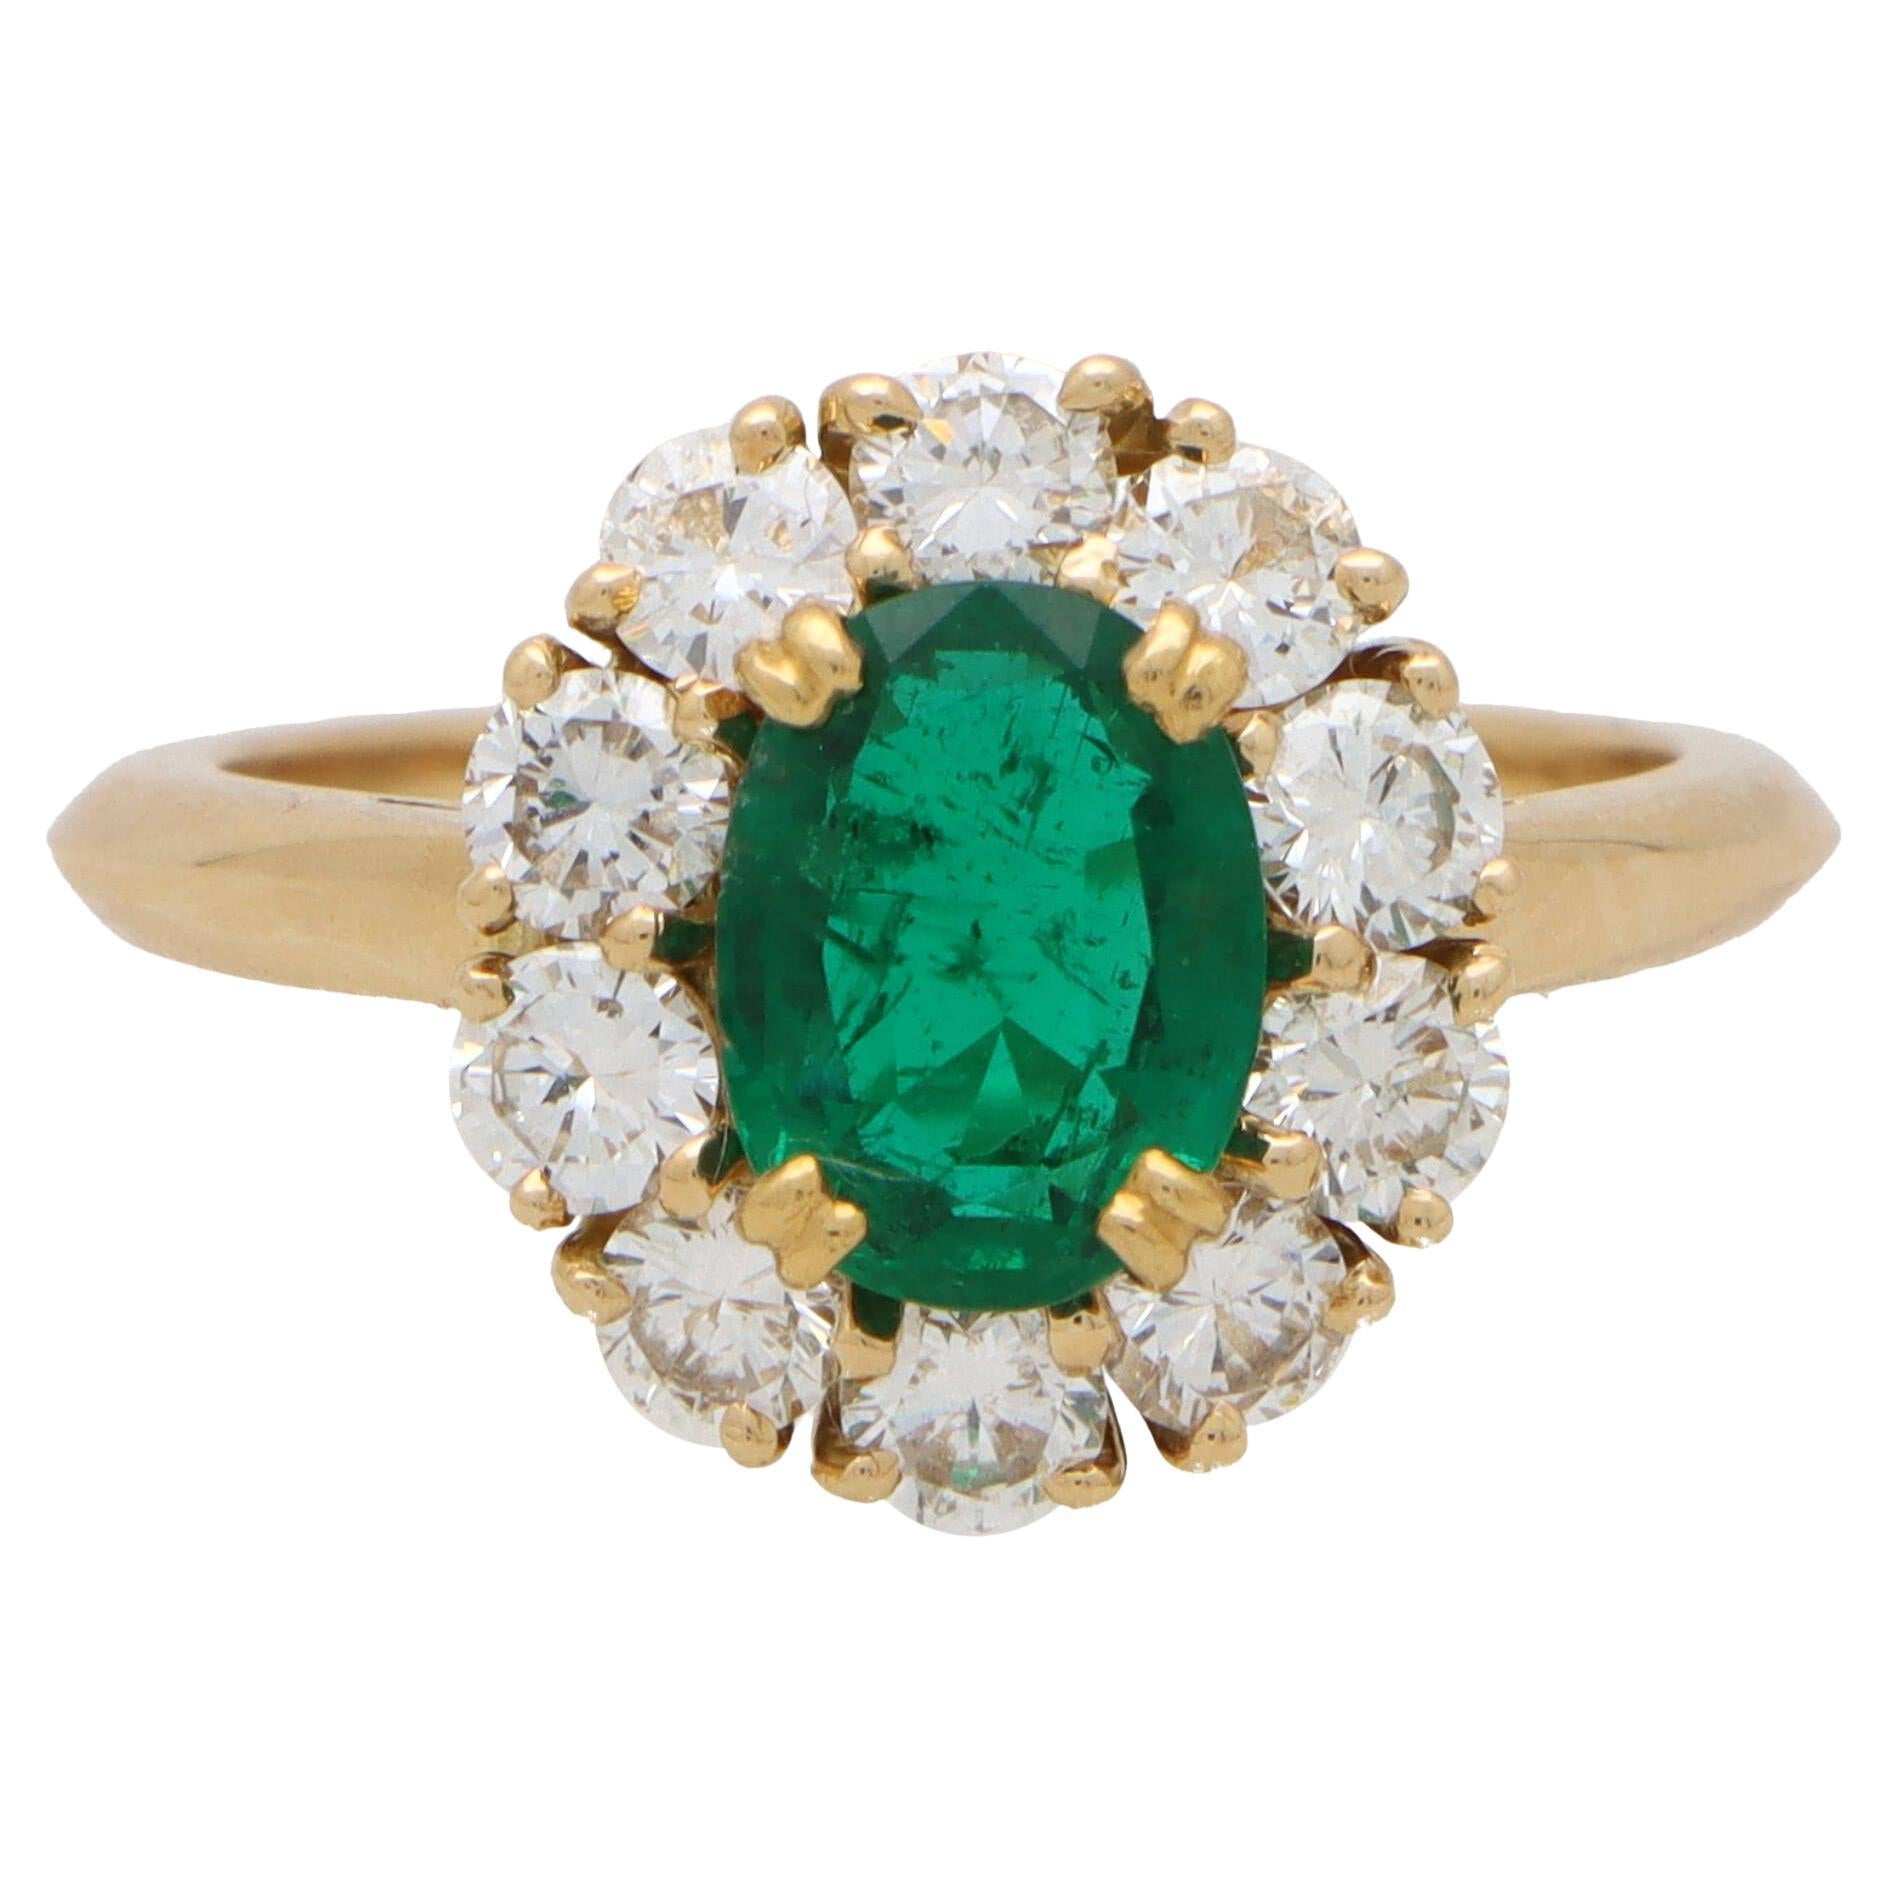 Vintage Mauboussin Emerald and Diamond Cluster Ring Set in 18k Yellow Gold